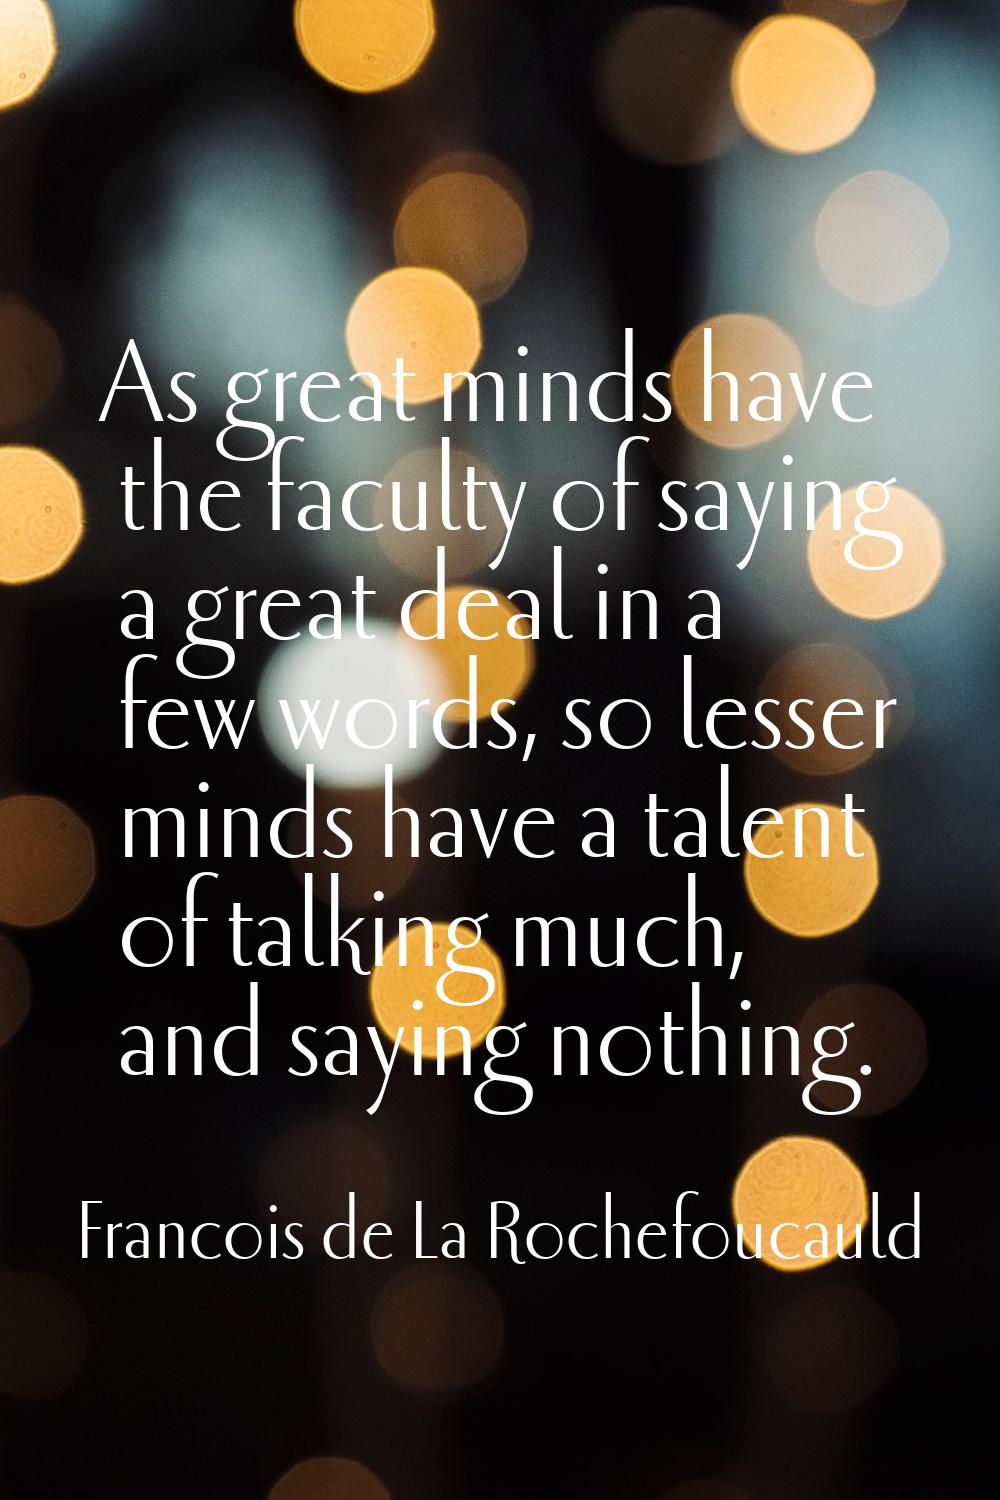 As great minds have the faculty of saying a great deal in a few words, so lesser minds have a talen